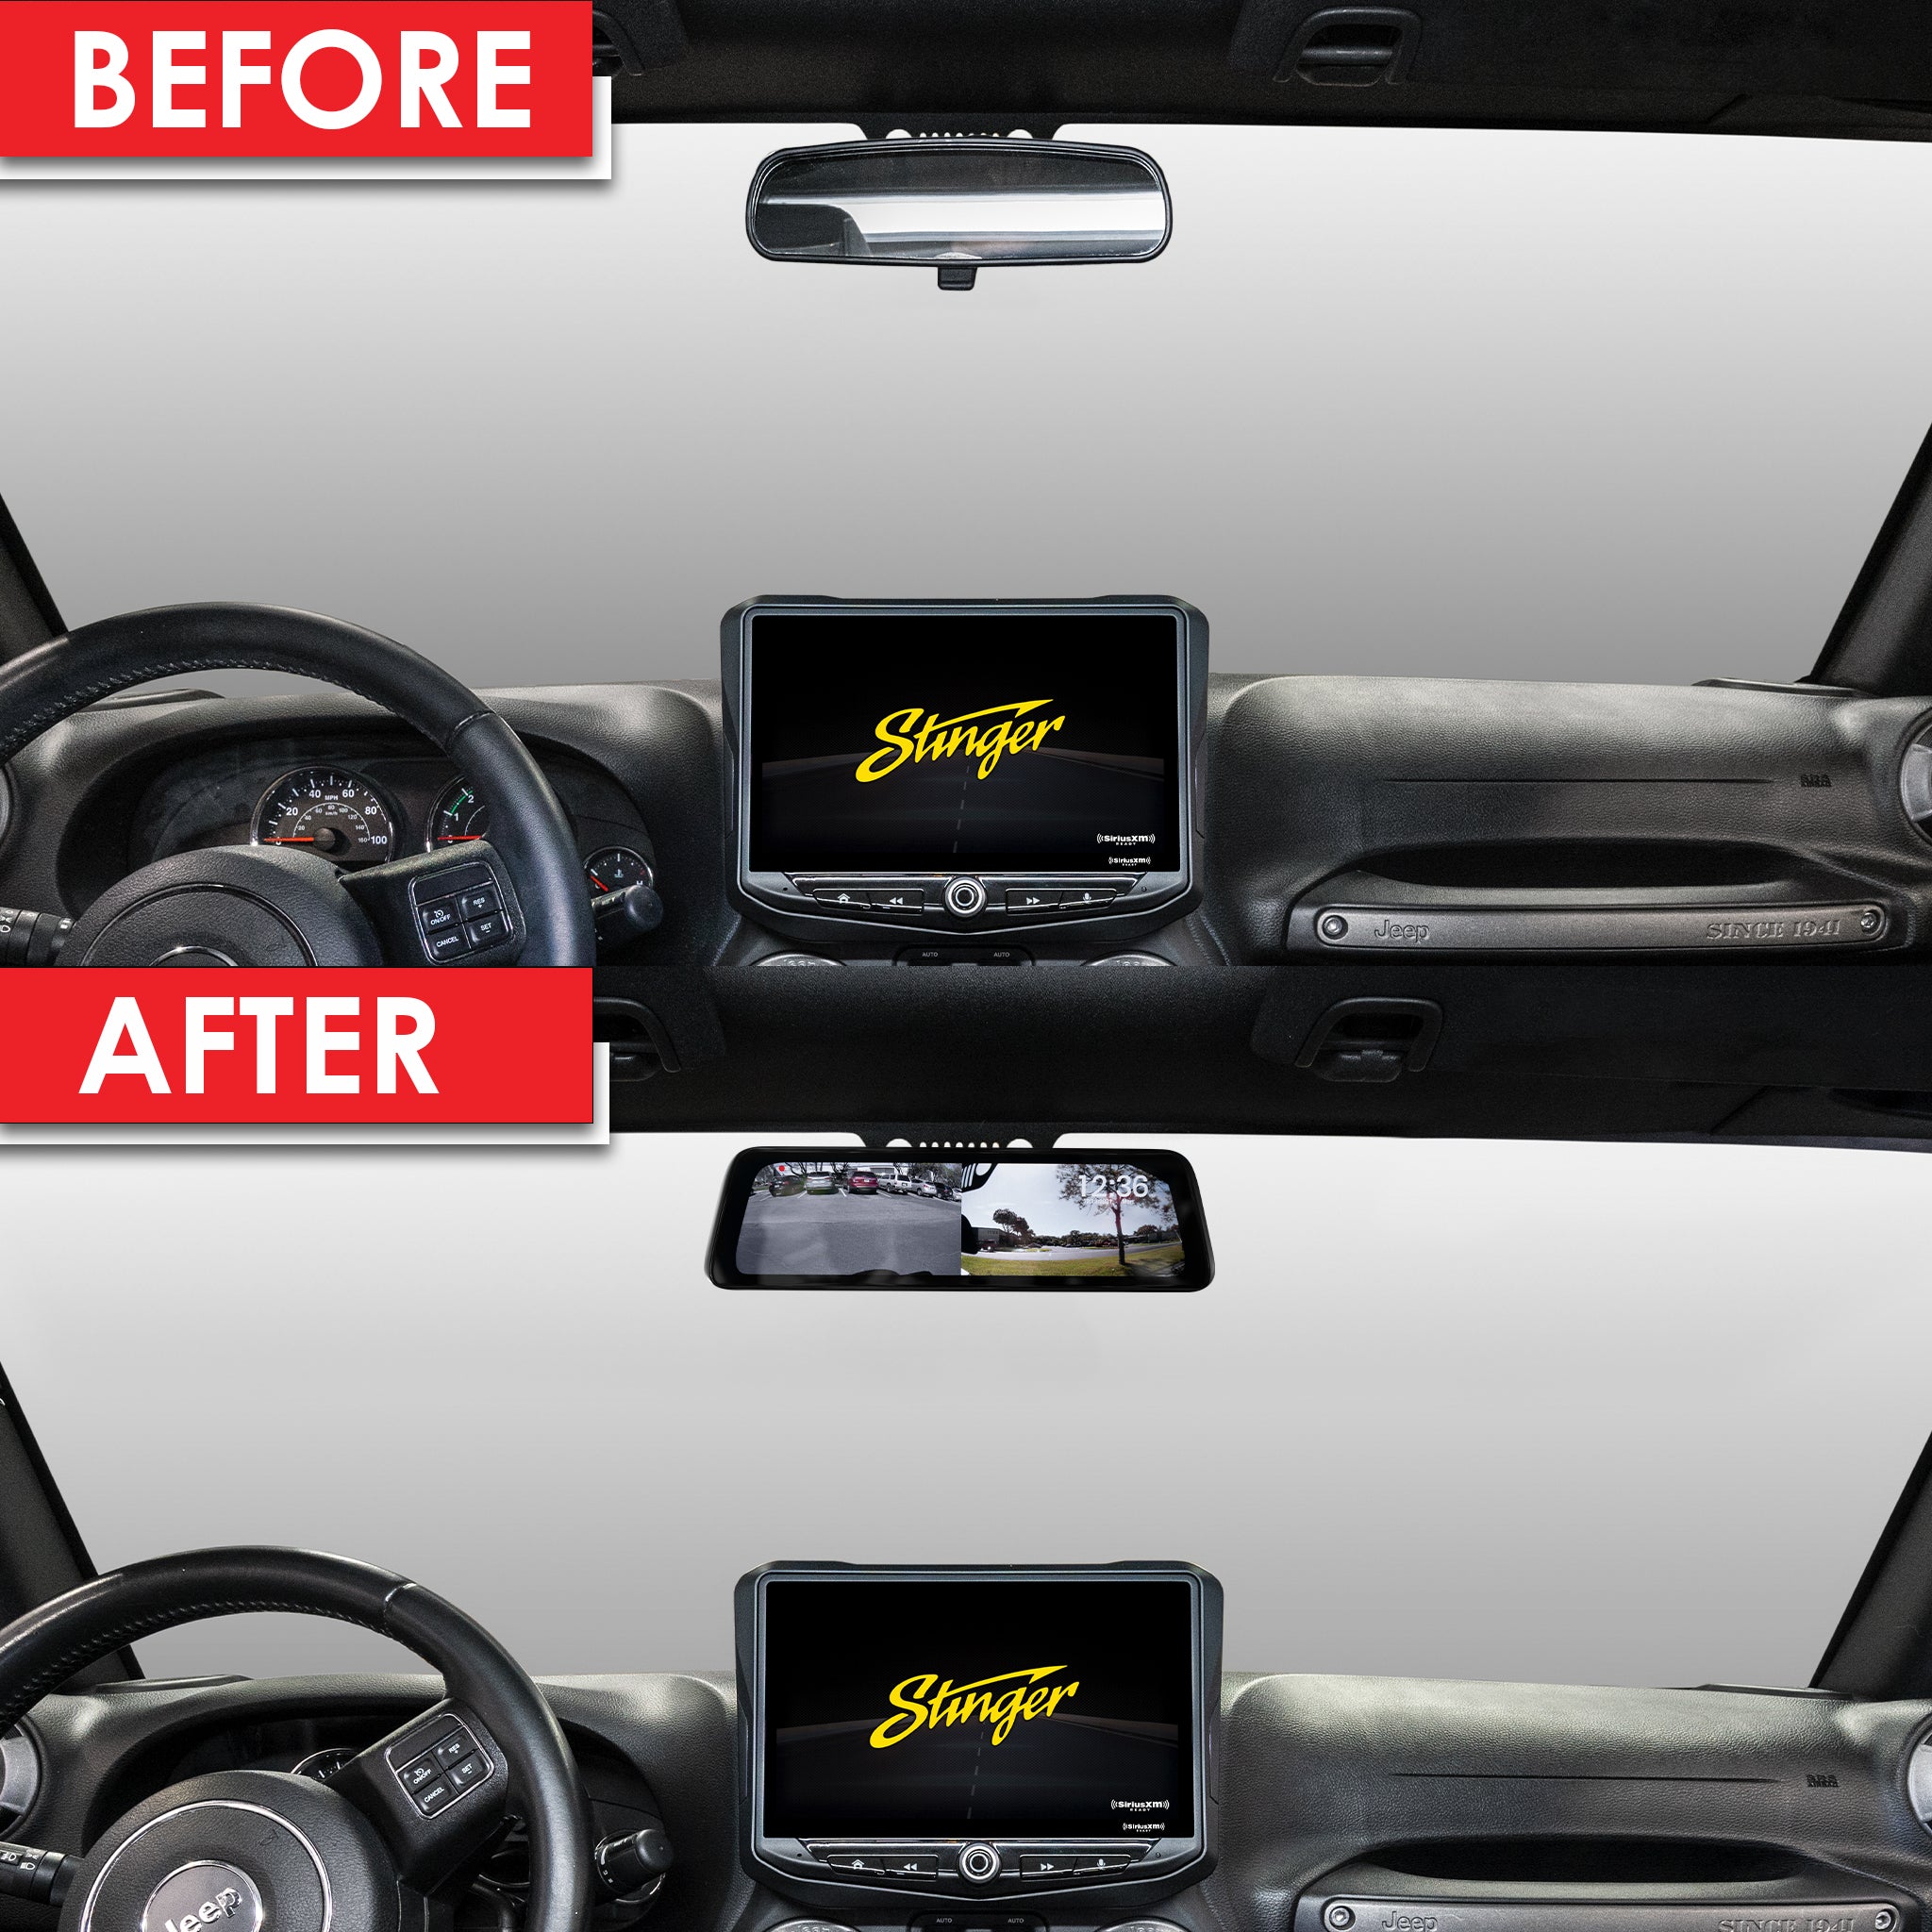 Jeep Wrangler HD Backup Camera & Replacement Rearview Mirror with Full Screen Monitor Kit & Built-In DVR